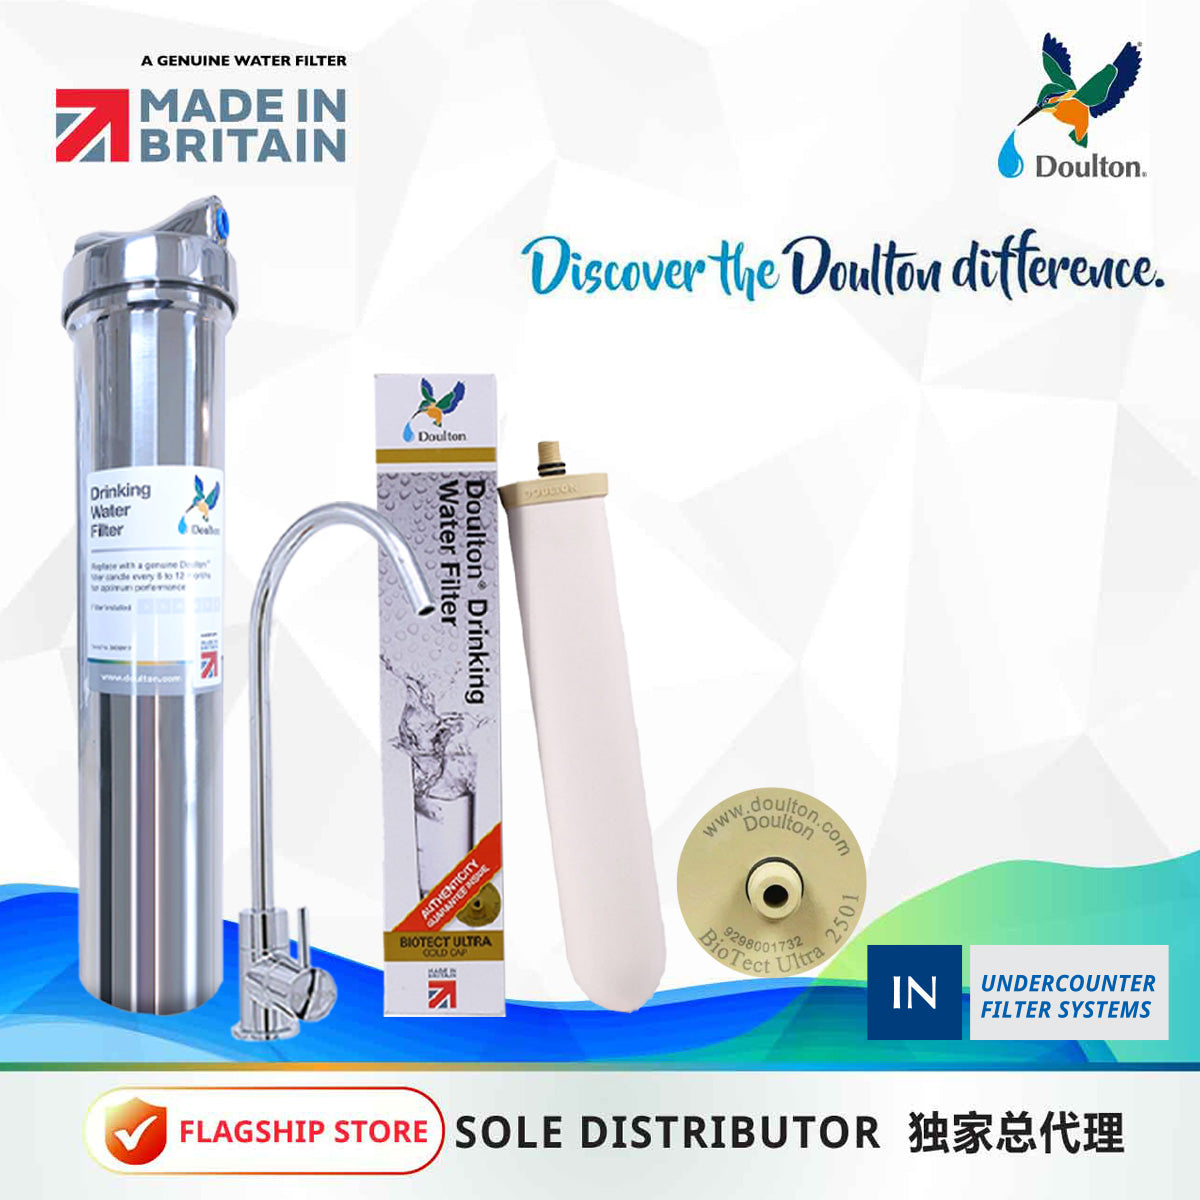 (limited time) Elevate Your Water Purity with the Doulton DIS Biotect Ultra (NSF) In-Counter Drinking Water Purifier - A Lifetime Investment in Health and Well-being! *FREE Installation!